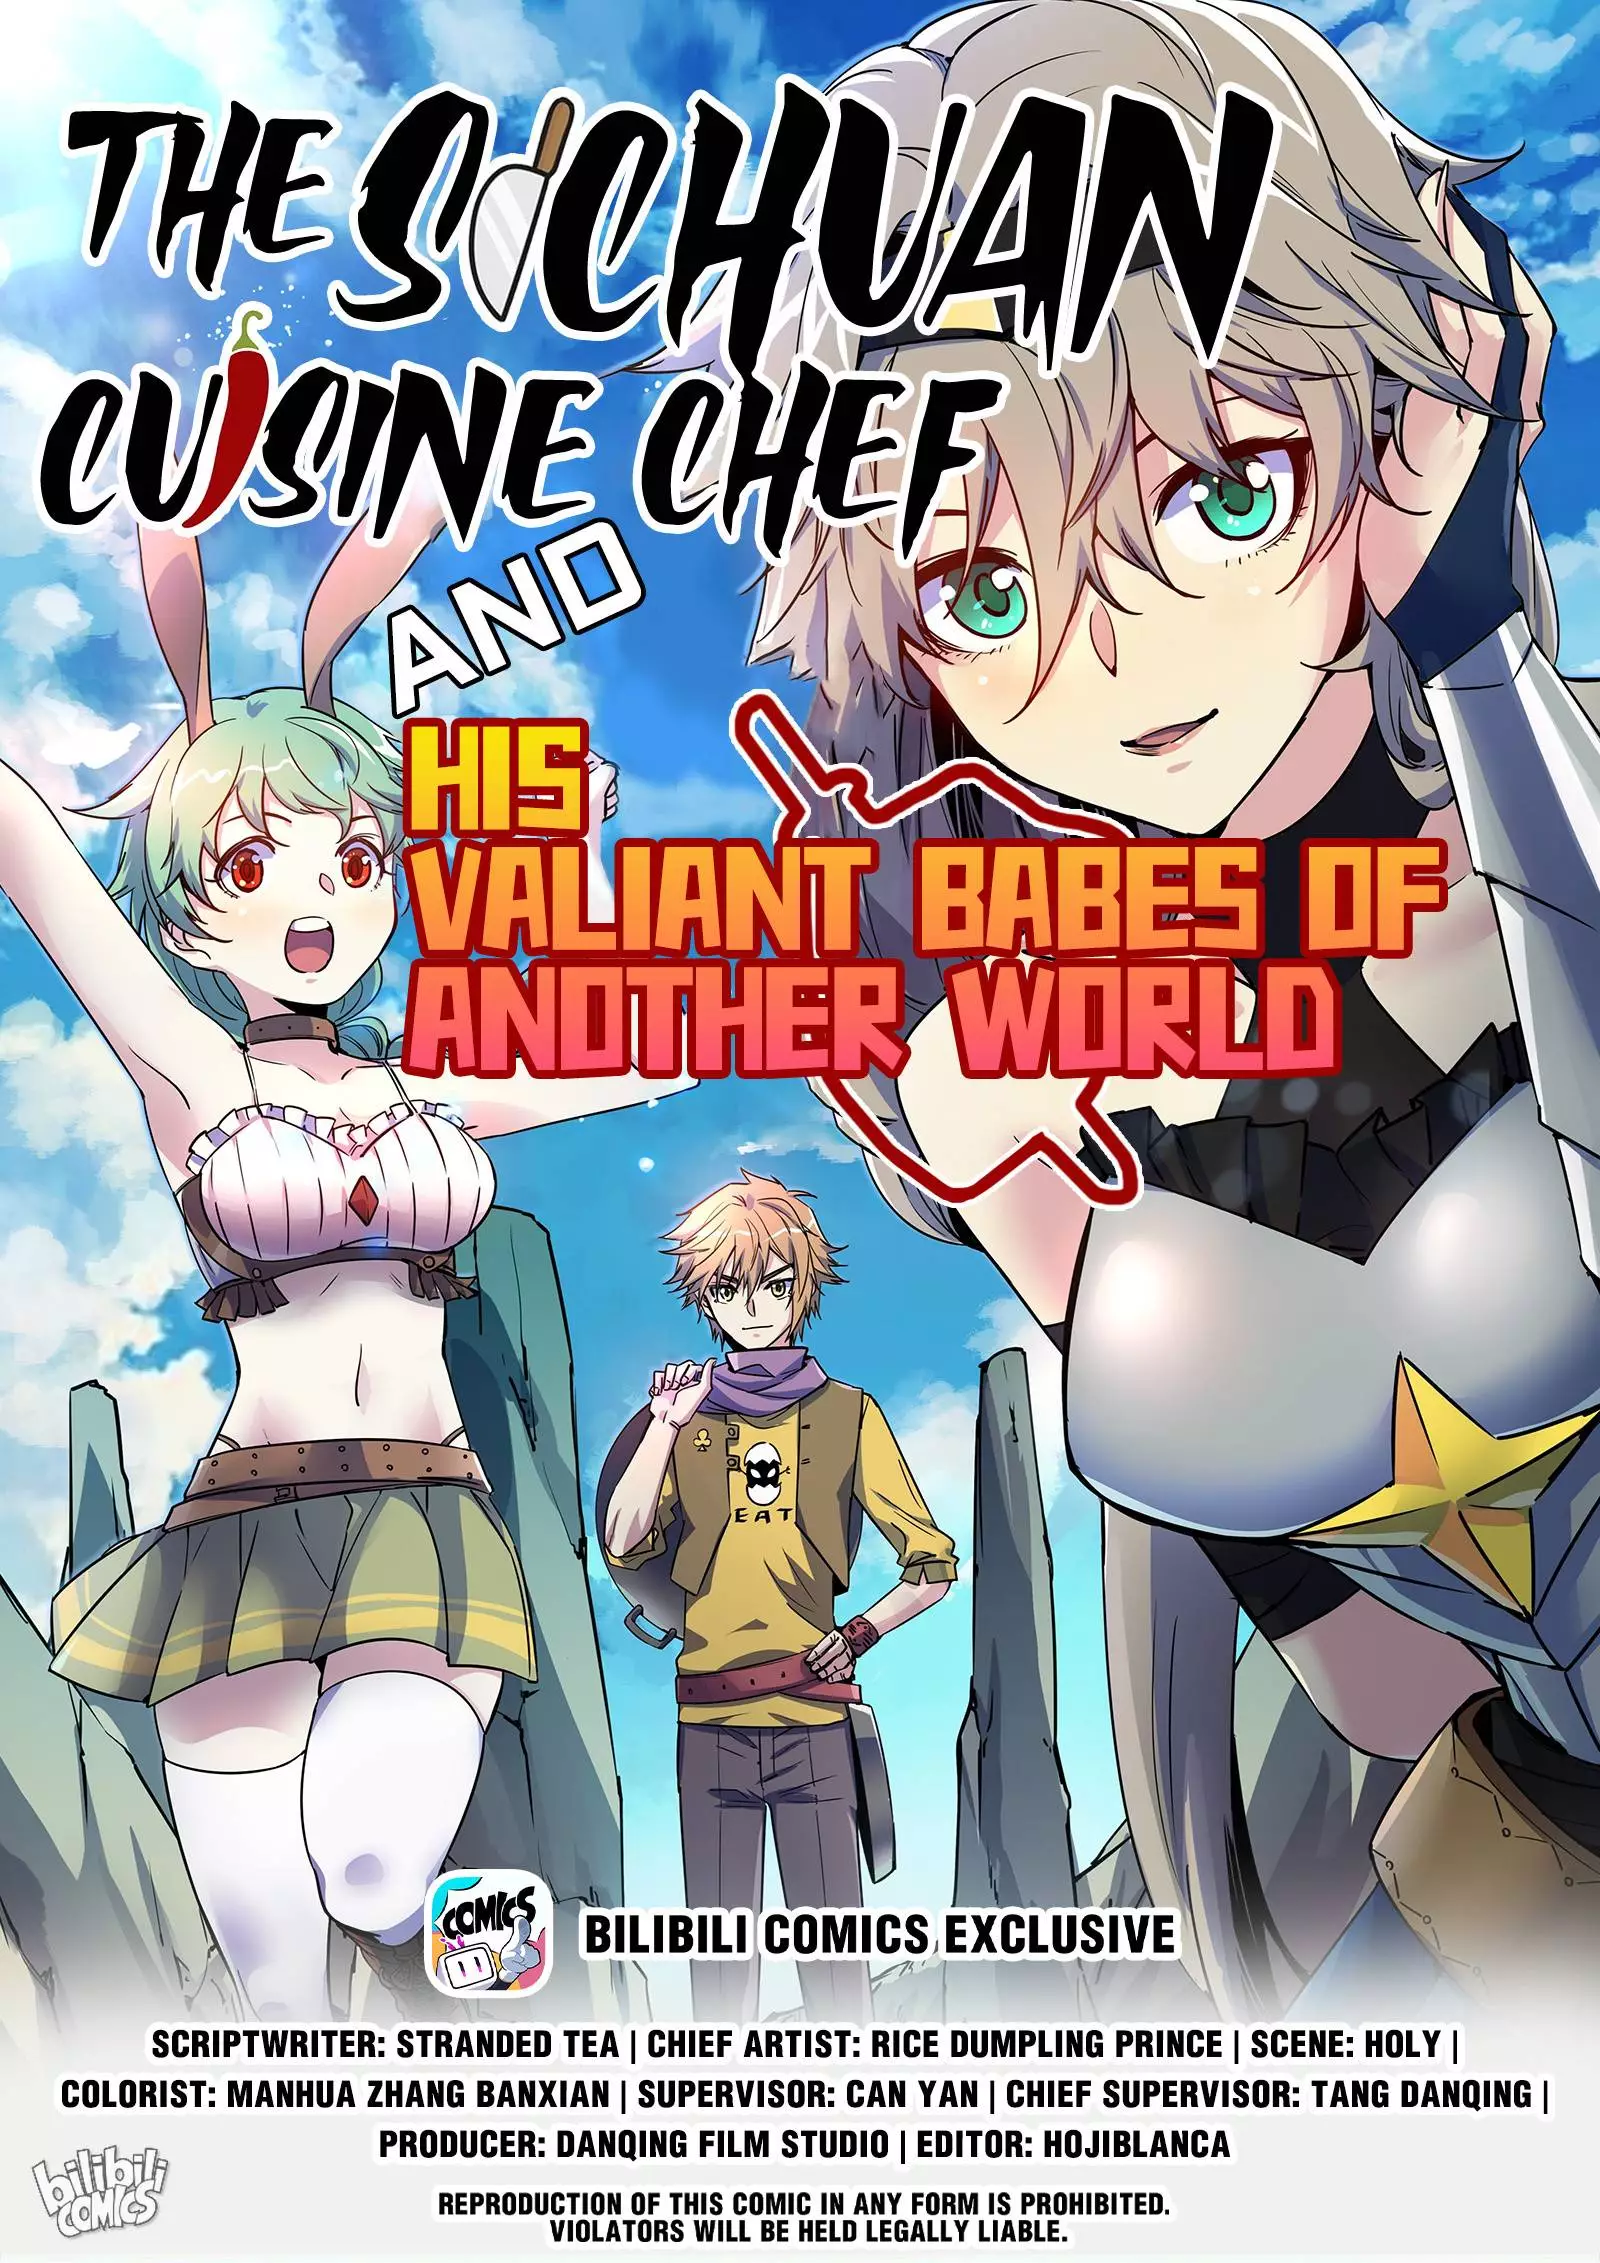 The Sichuan Cuisine Chef And His Valiant Babes Of Another World - 28 page 1-c95736fd